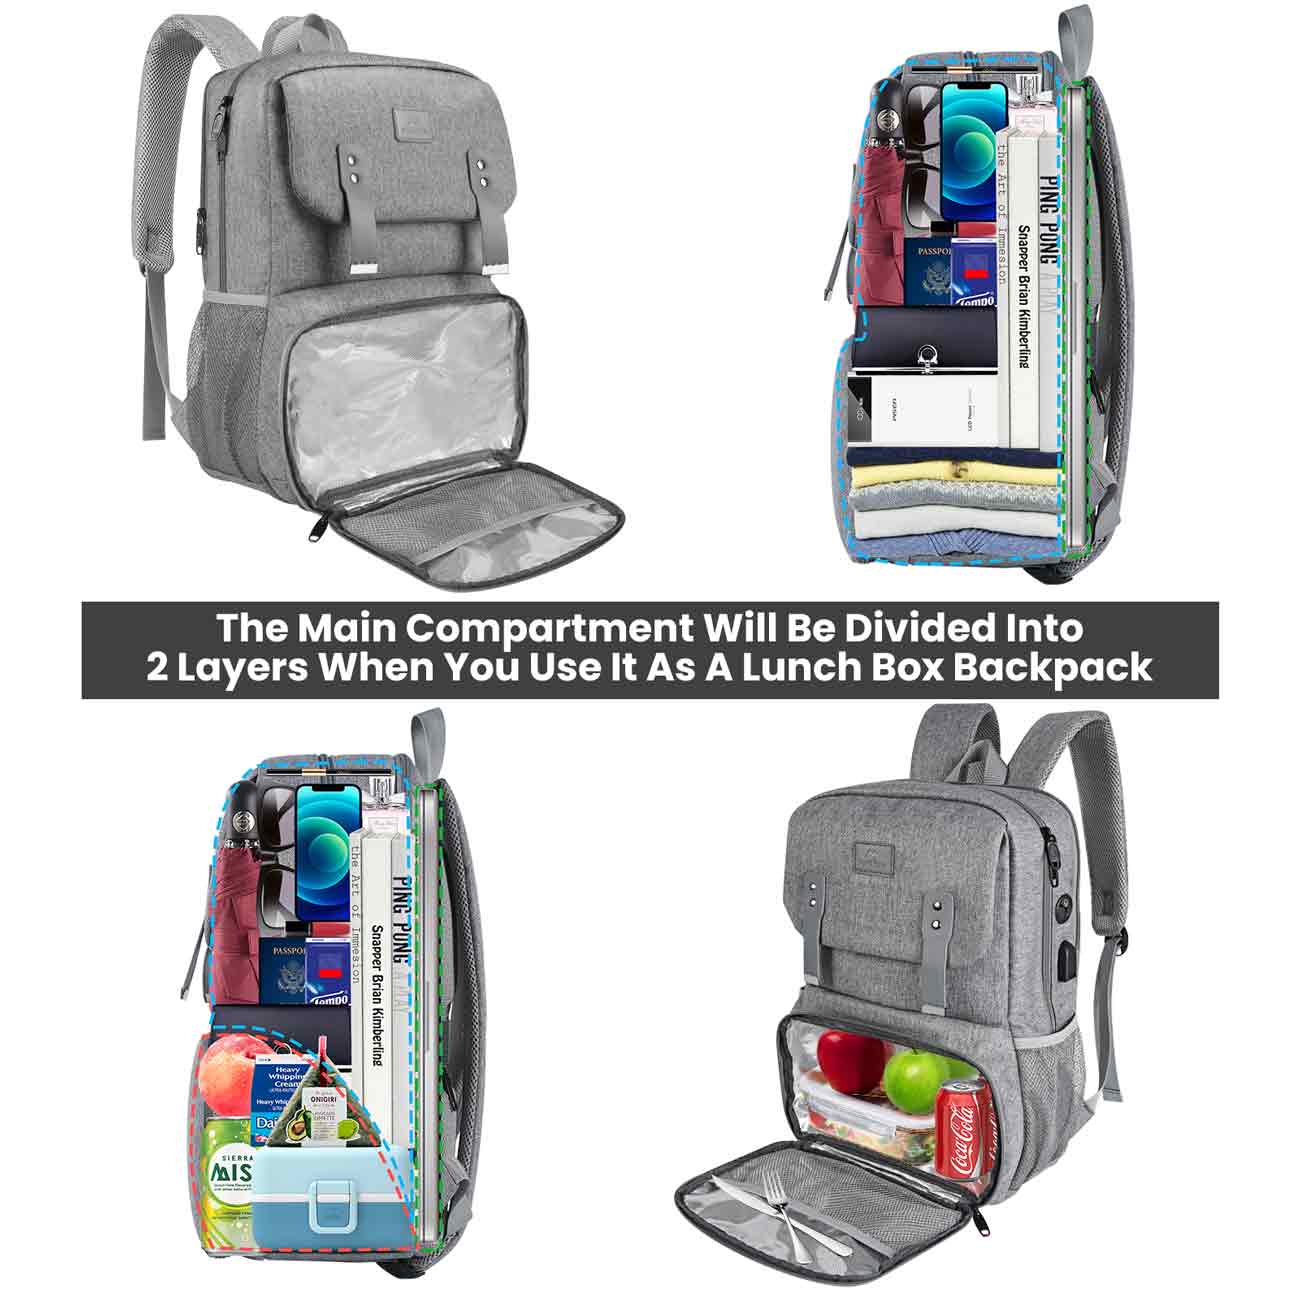 Matein backpack lunchbox for college